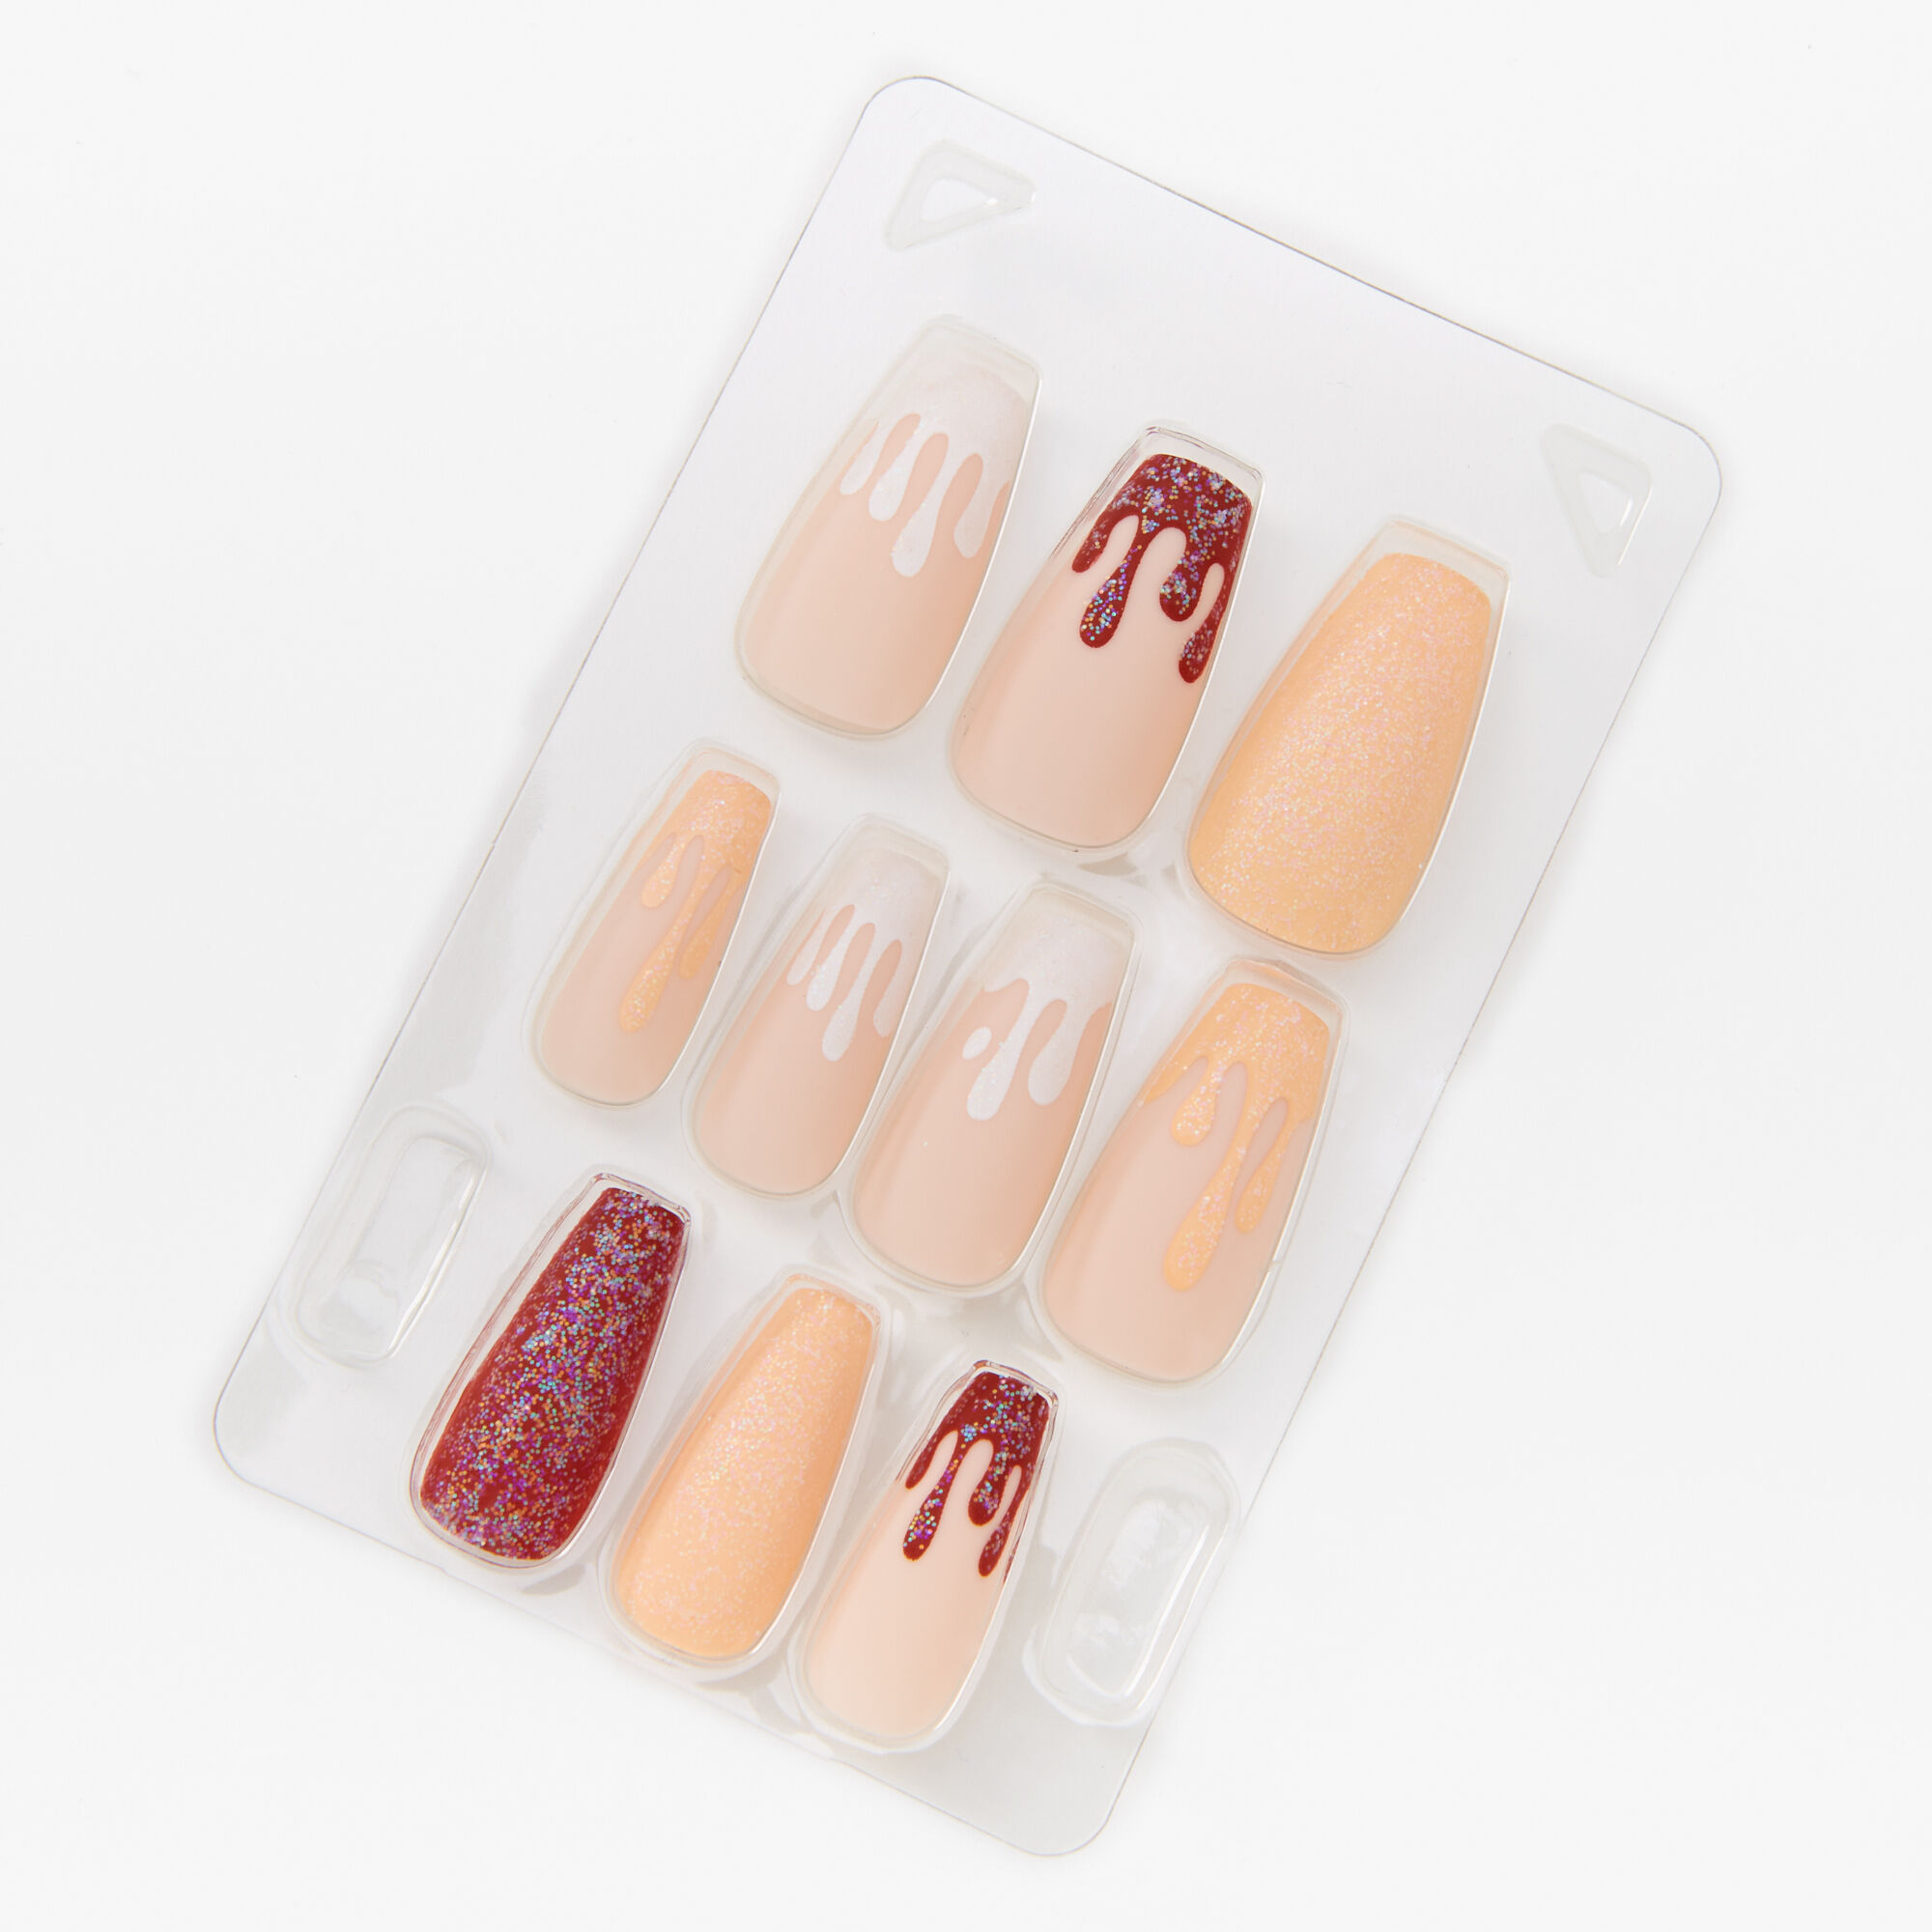 View Claires Glitter Drip Squareletto Press On Vegan Faux Nail Set 24 Pack information